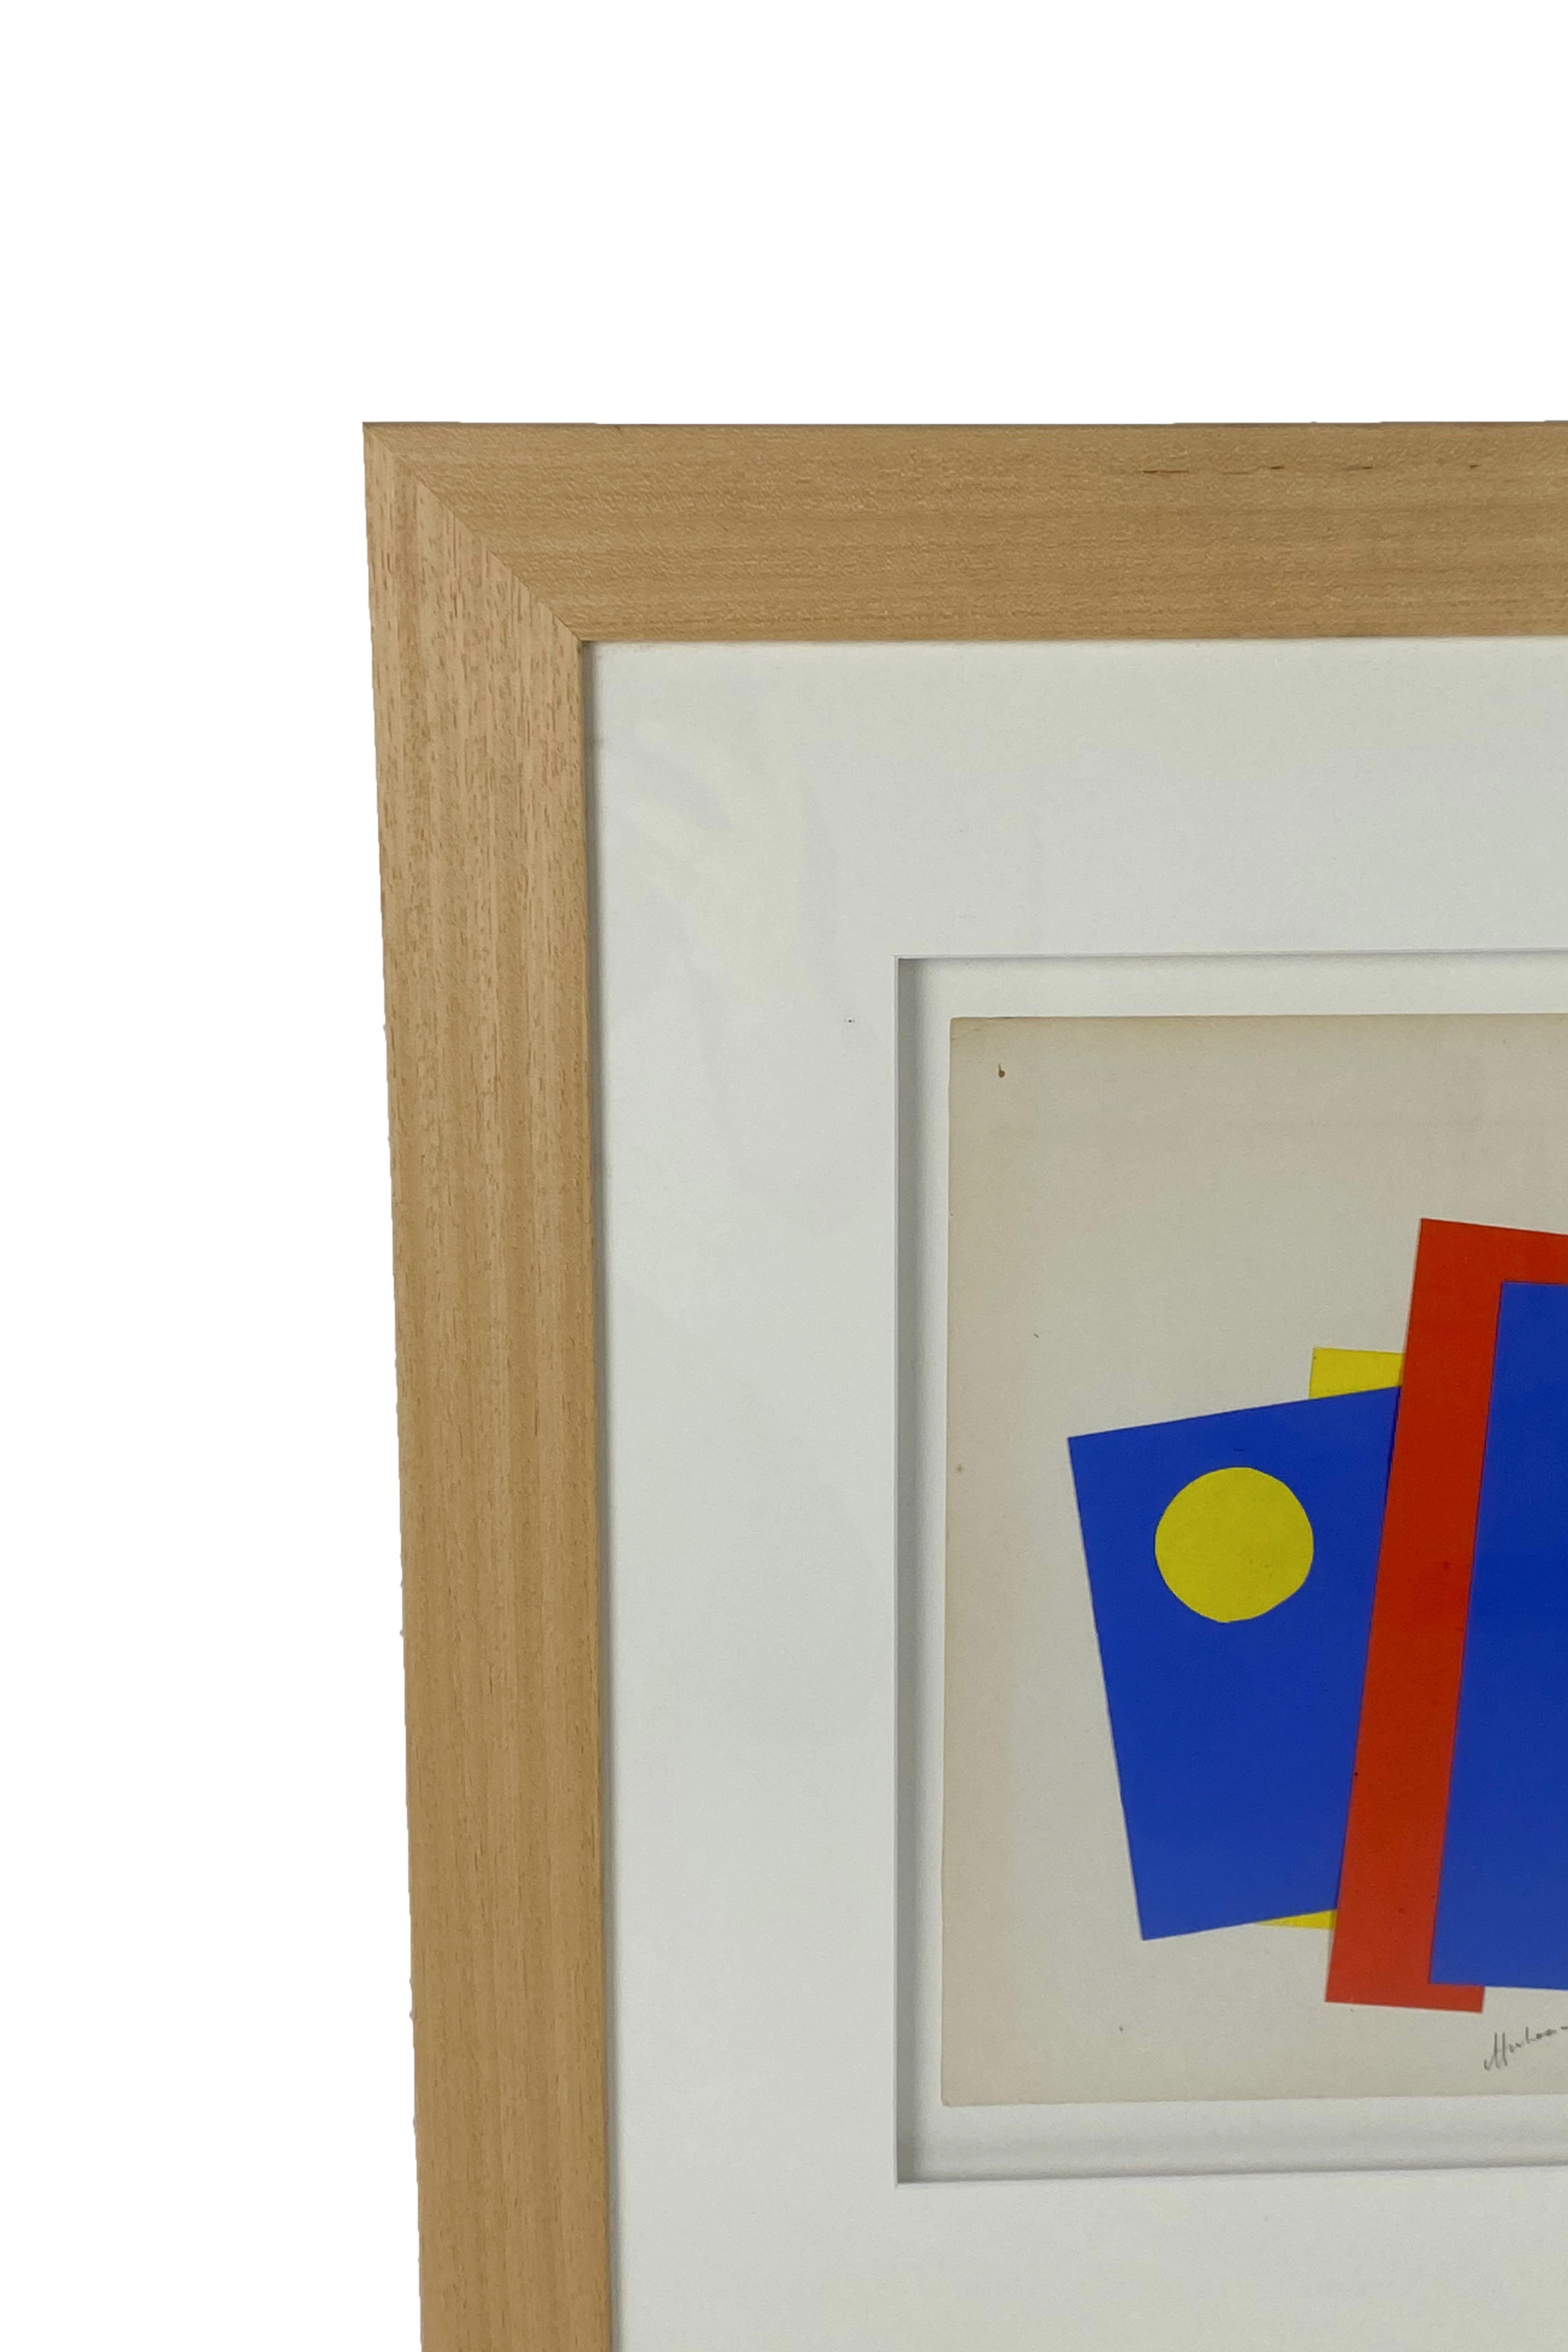 Albert Chubac Collage
Signed.
Framed.
Midcentury abstract modern,
circa 1950, France.
Very good vintage condition.
Albert Chubac was born in 1925 in Geneva, Switzerland. After graduating from l'Ecole des Beaux Arts in 1947, he lived in and